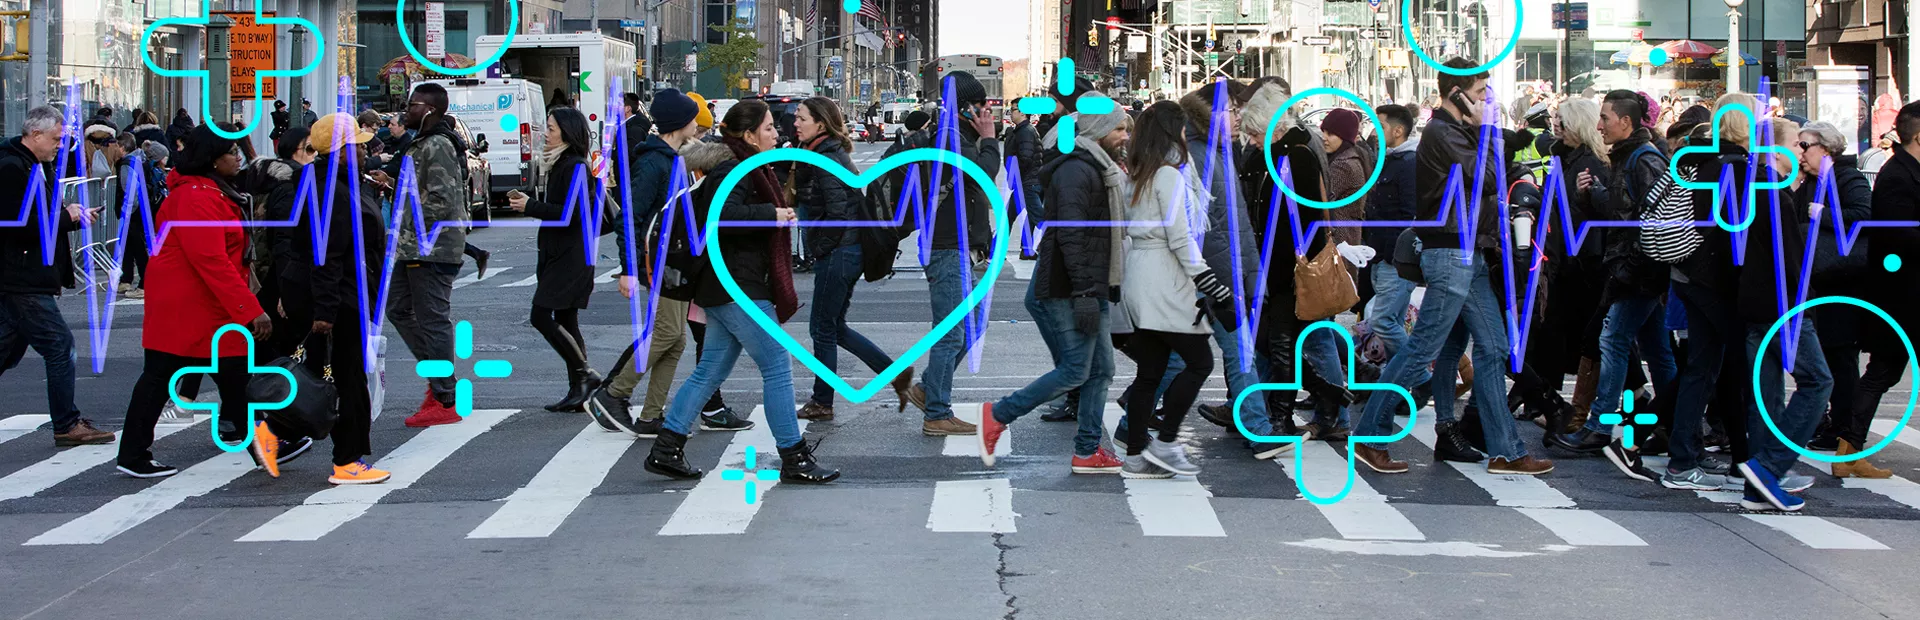 People on a pedestrian crossing in a city with overlay of ECG curve illustration